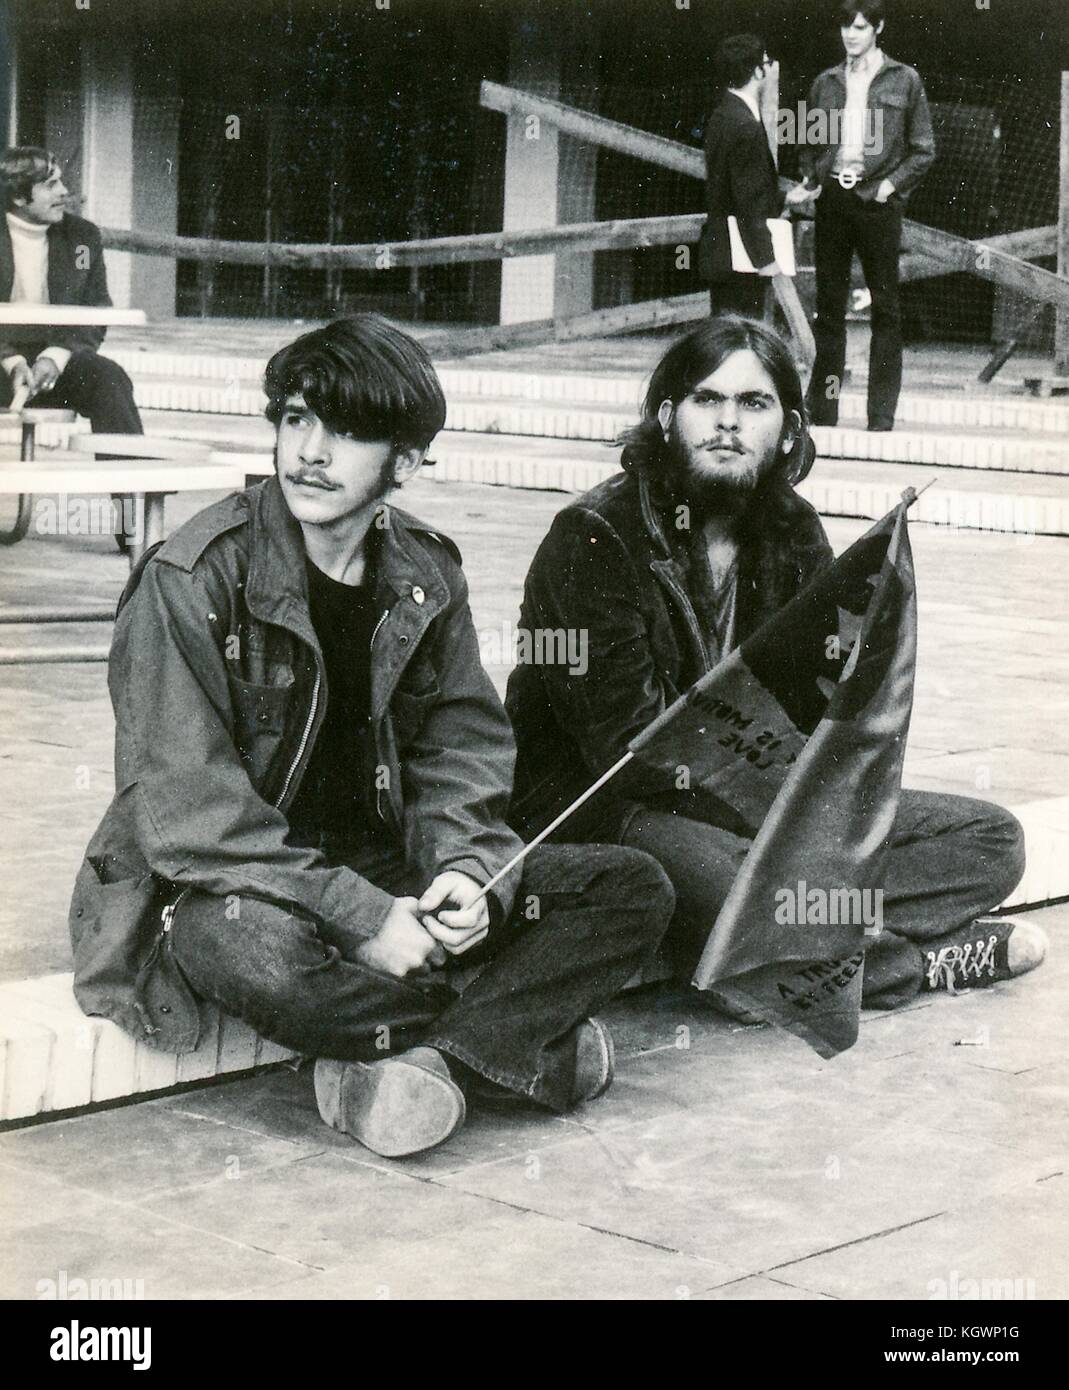 Two male students wearing hippie attire sit on a step, with one holding a flag with the face of revolutionary Che Guevara, during an anti Vietnam War student sit-in protest at North Carolina State University, Raleigh, North Carolina, 1970. () Stock Photo